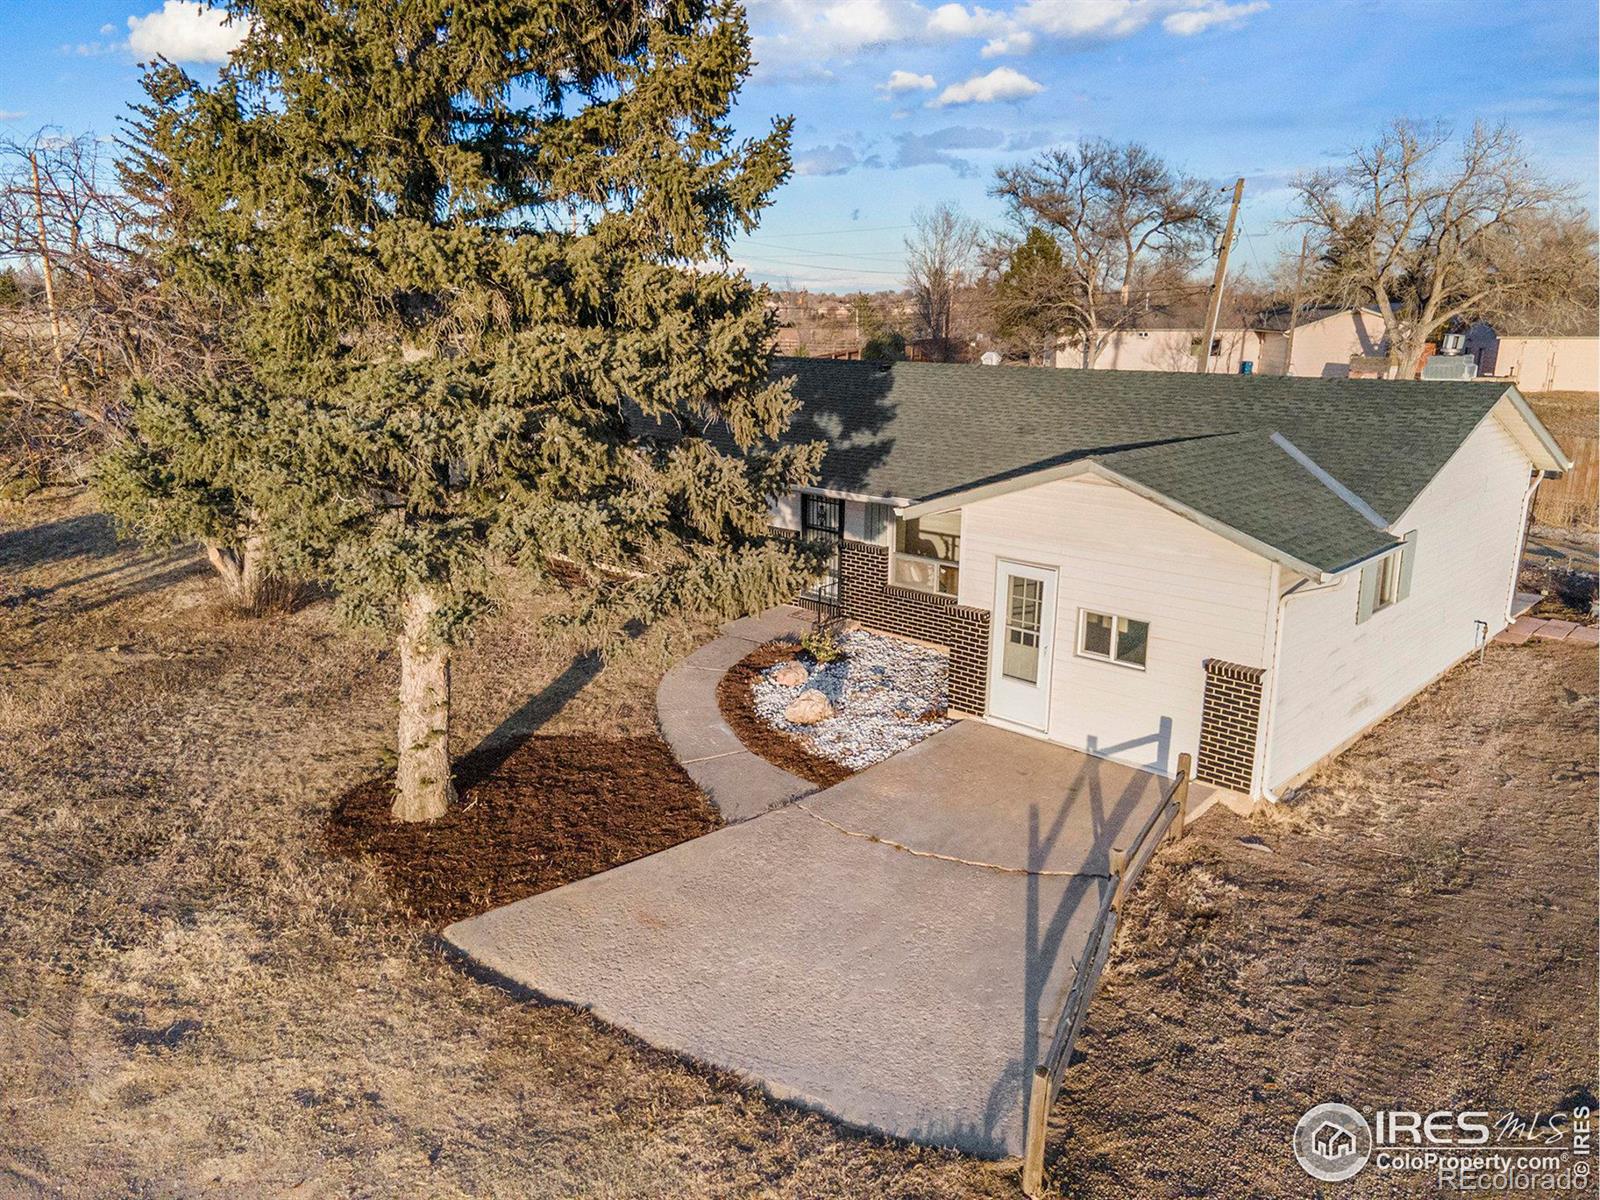 CMA Image for 7430 n county road 15 ,Fort Collins, Colorado